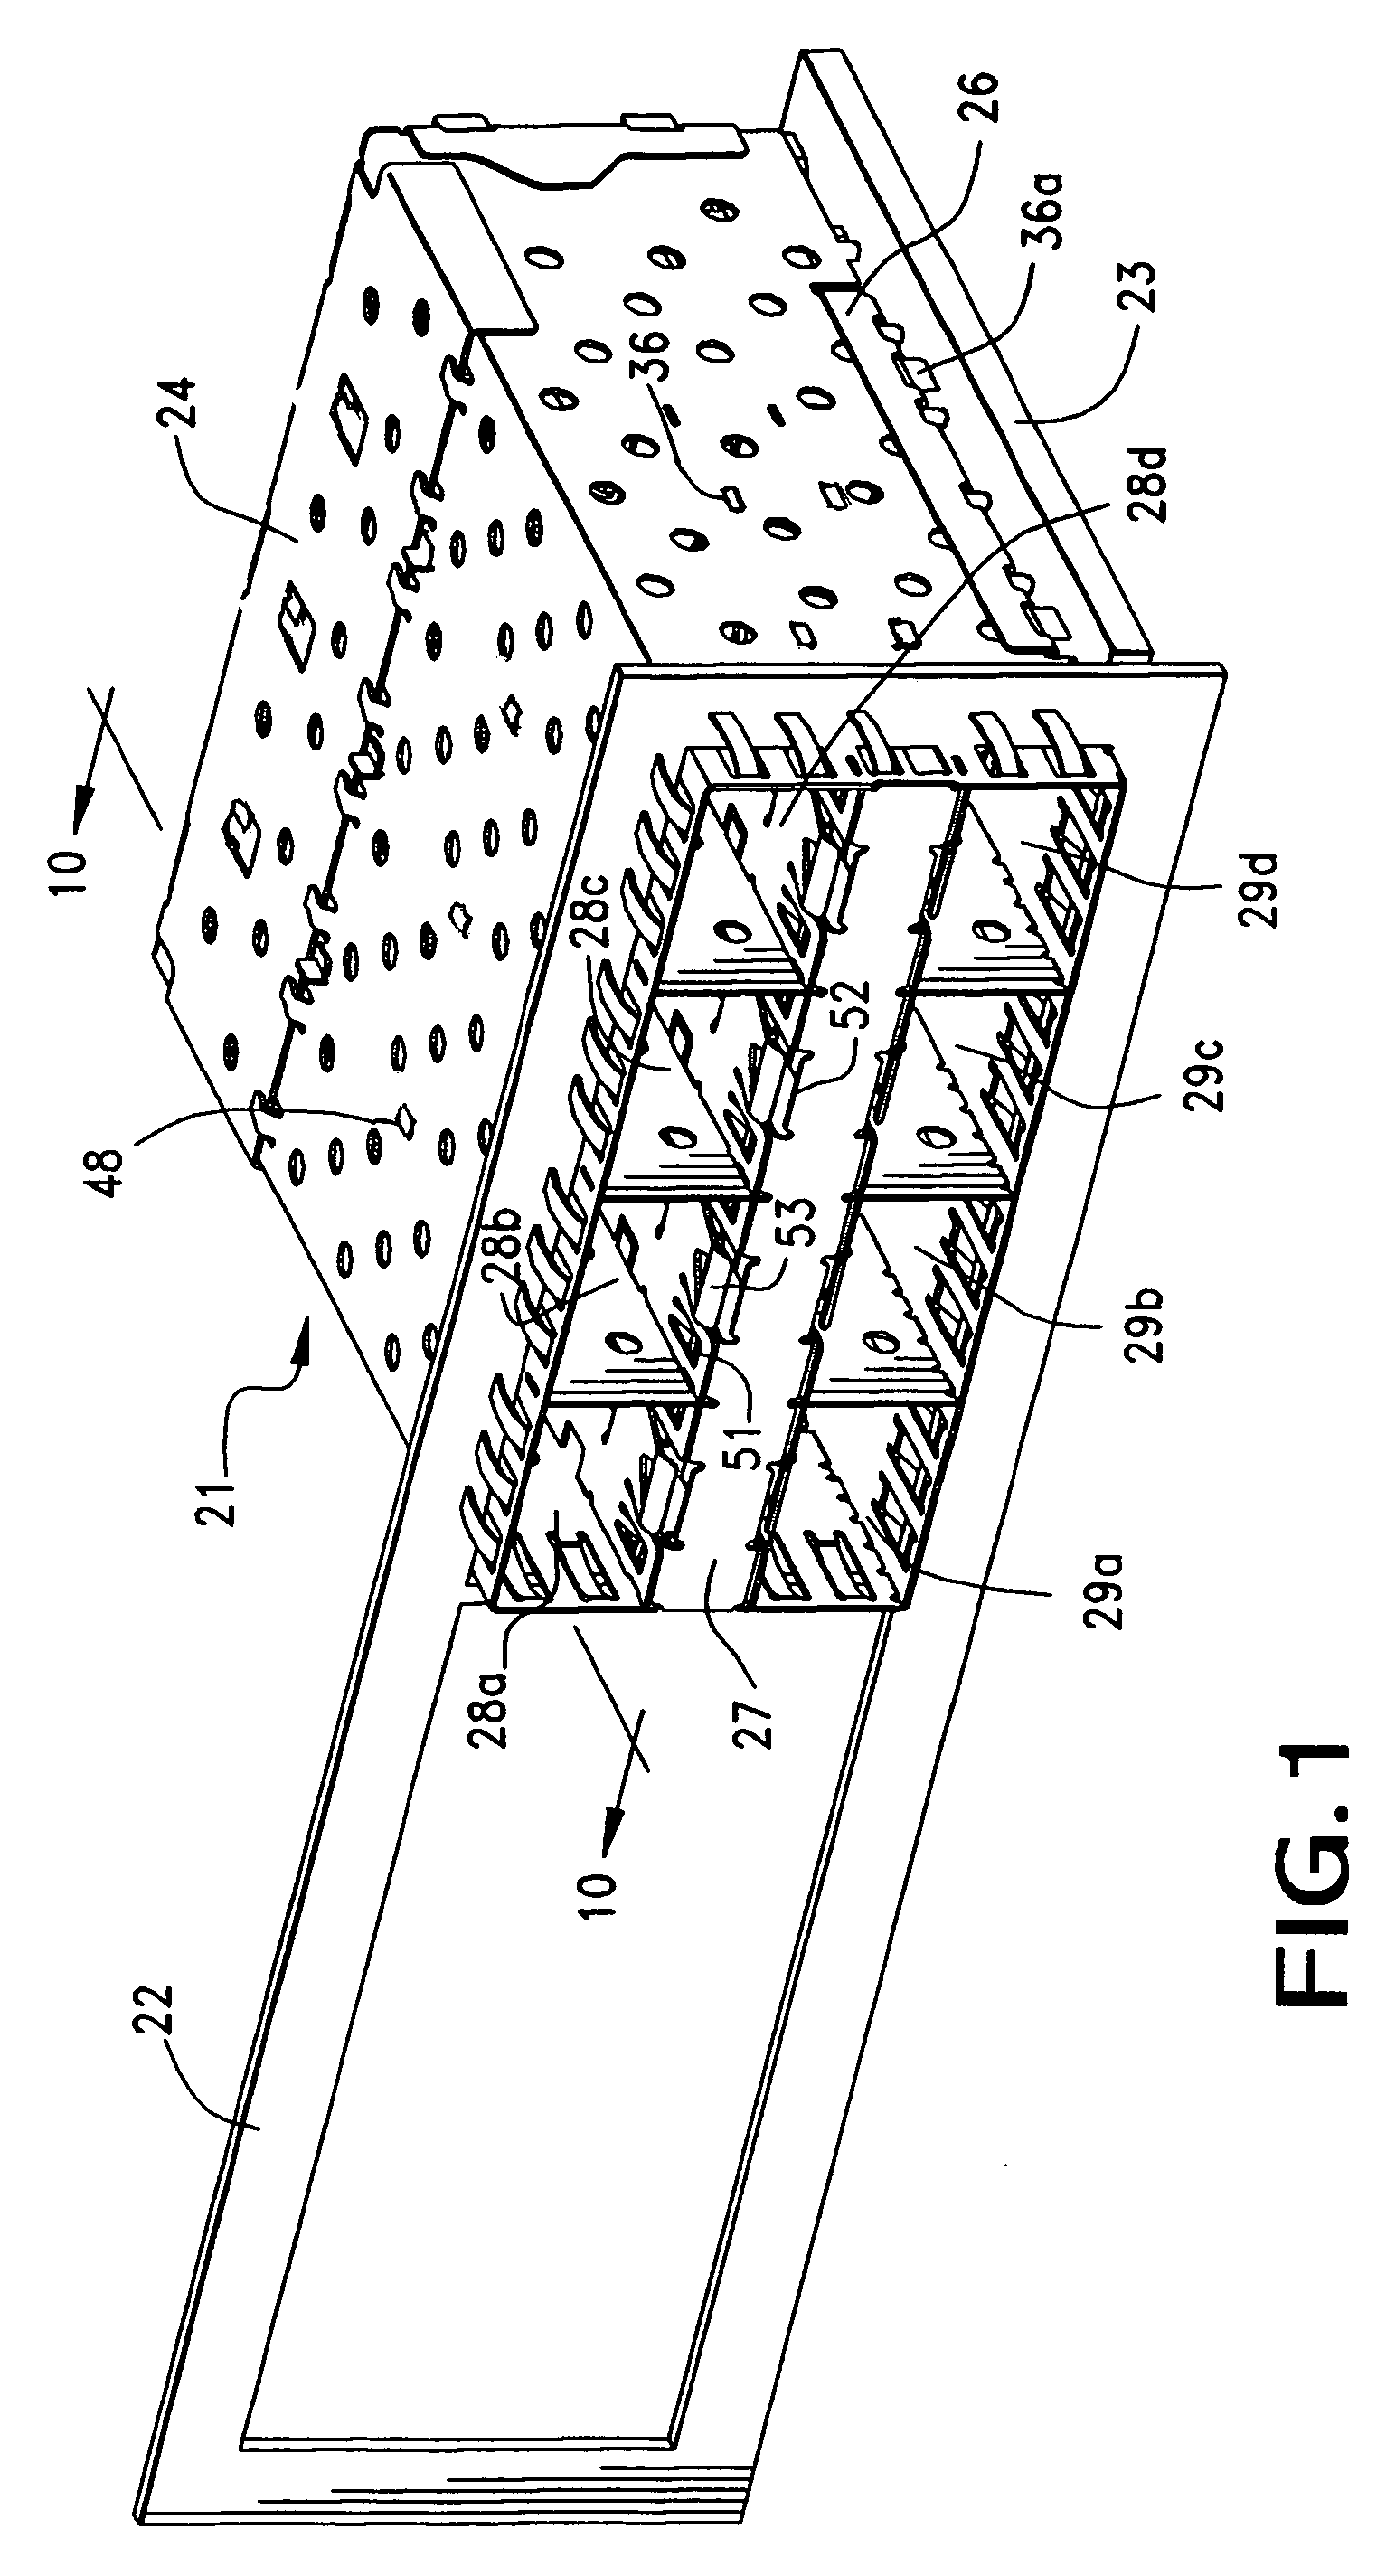 Shielded cage assembly for electrical connectors